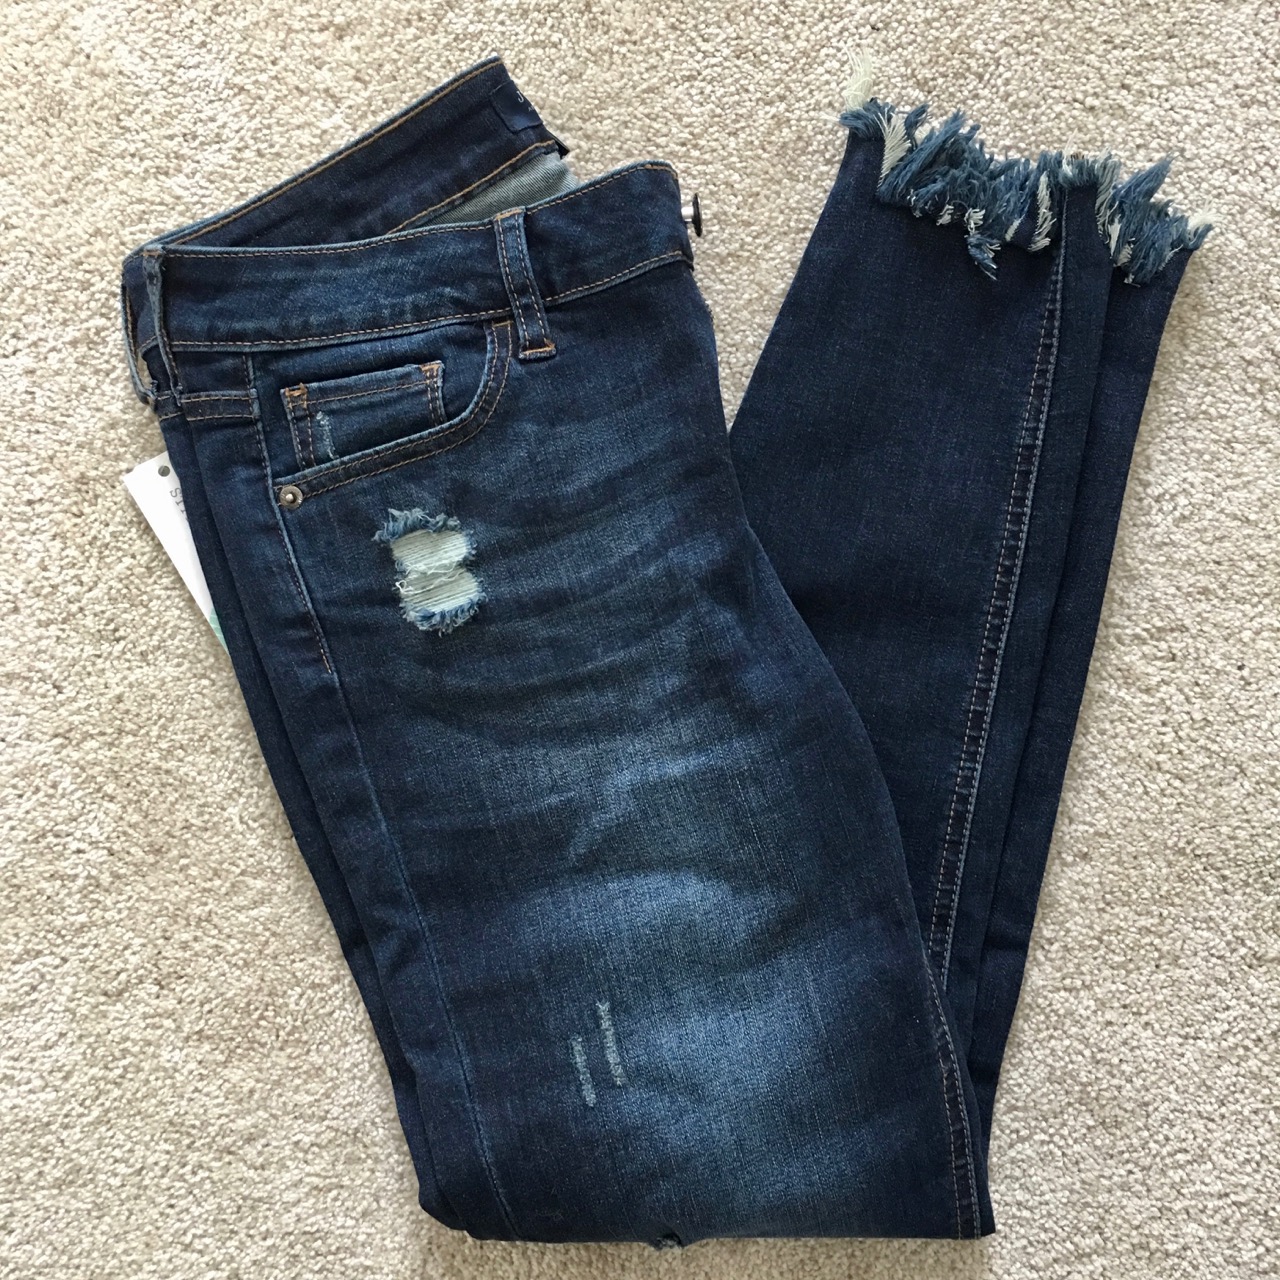 What's Inside My Stitch Fix Box? - Smashed Peas & Carrots